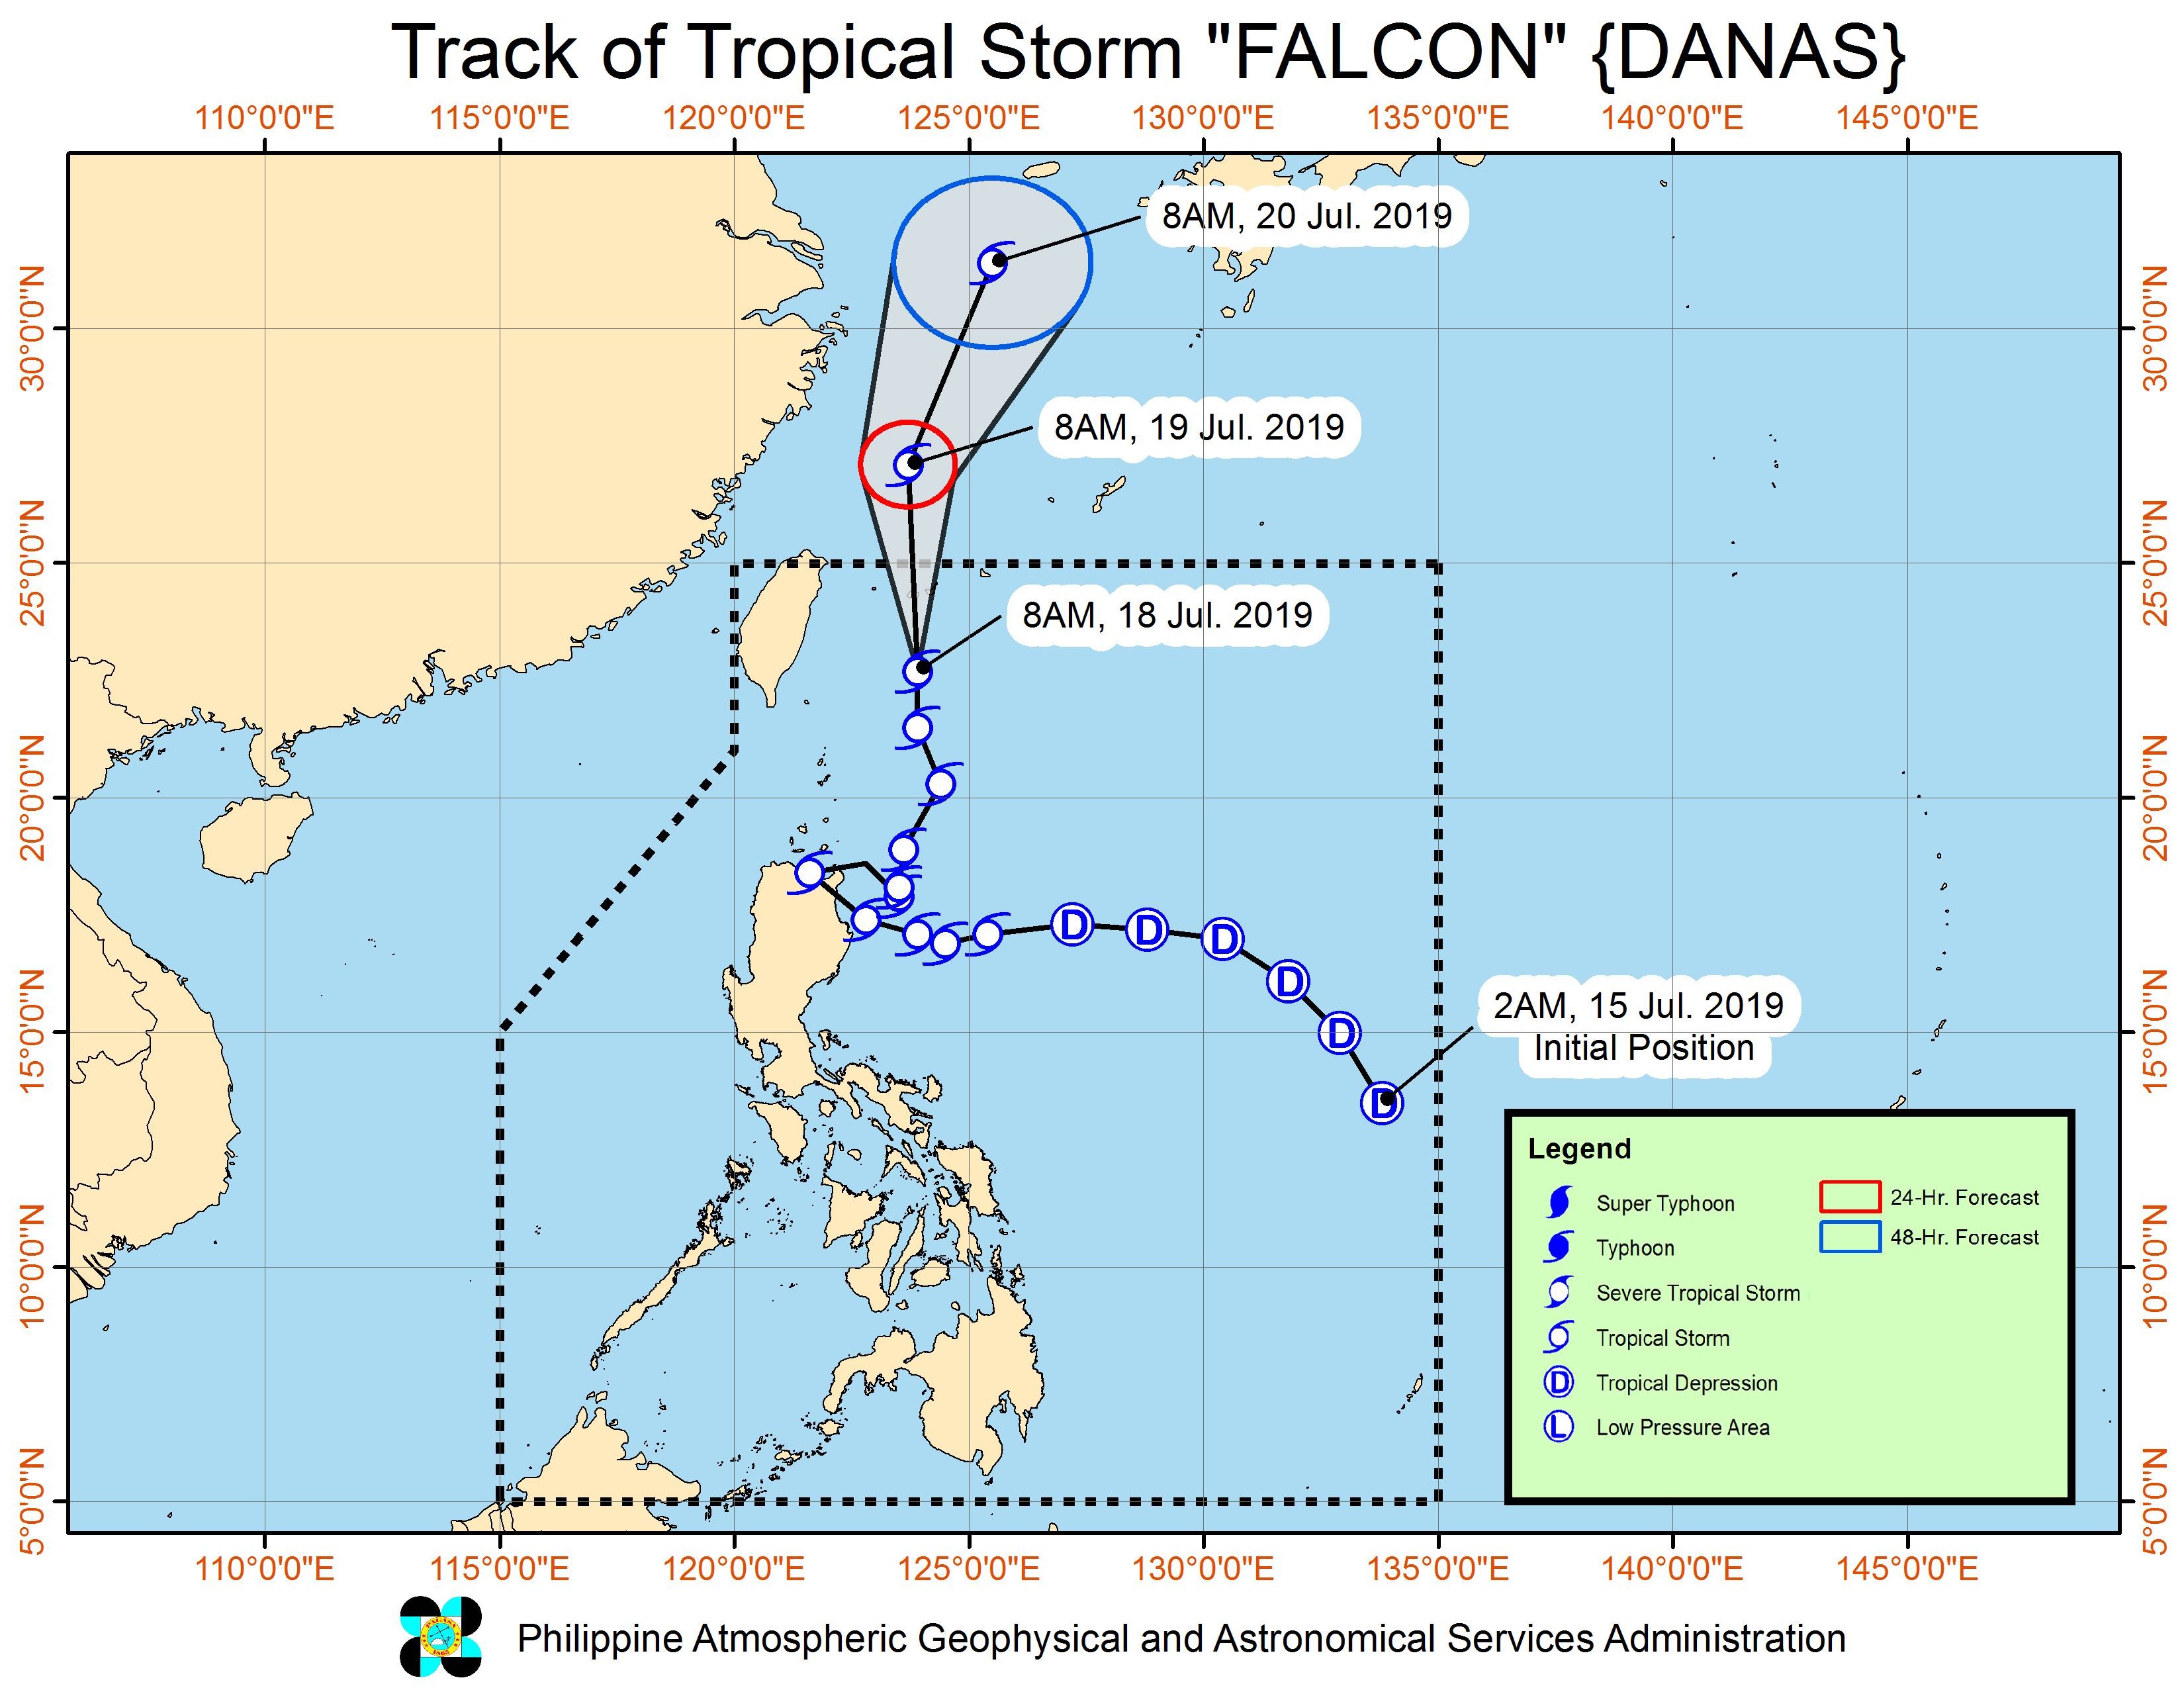 Forecast track of Tropical Storm Falcon (Danas) as of July 18, 2019, 11 am. Image from PAGASA 